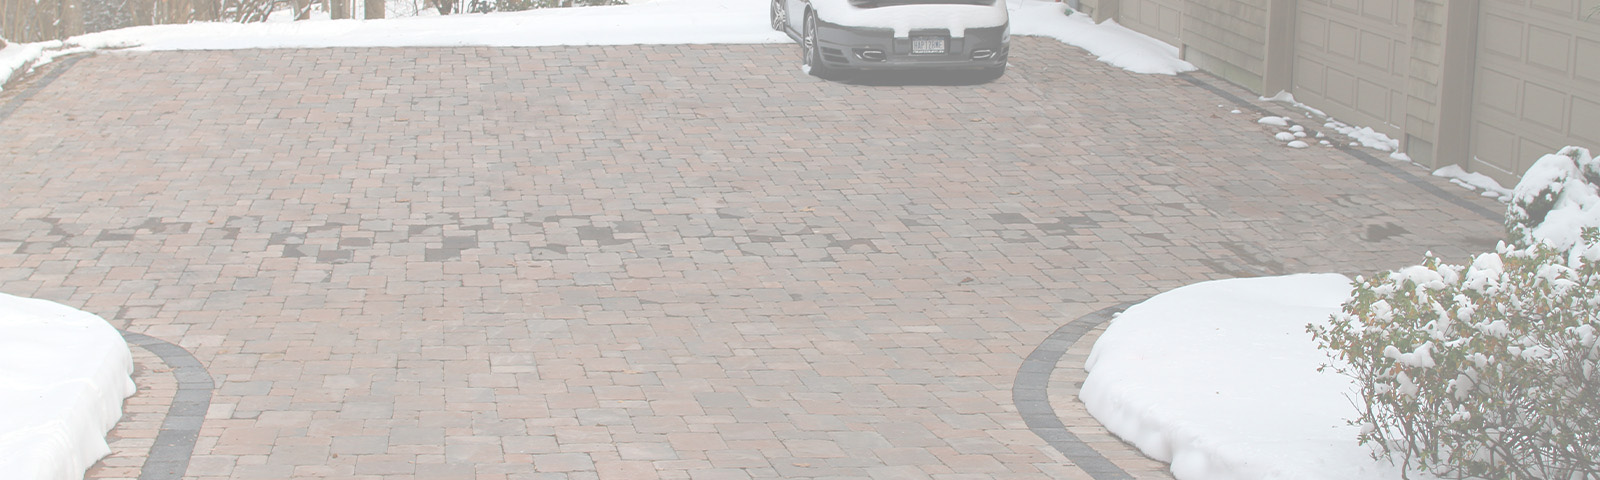 A heated paver driveway after a snowstorm.